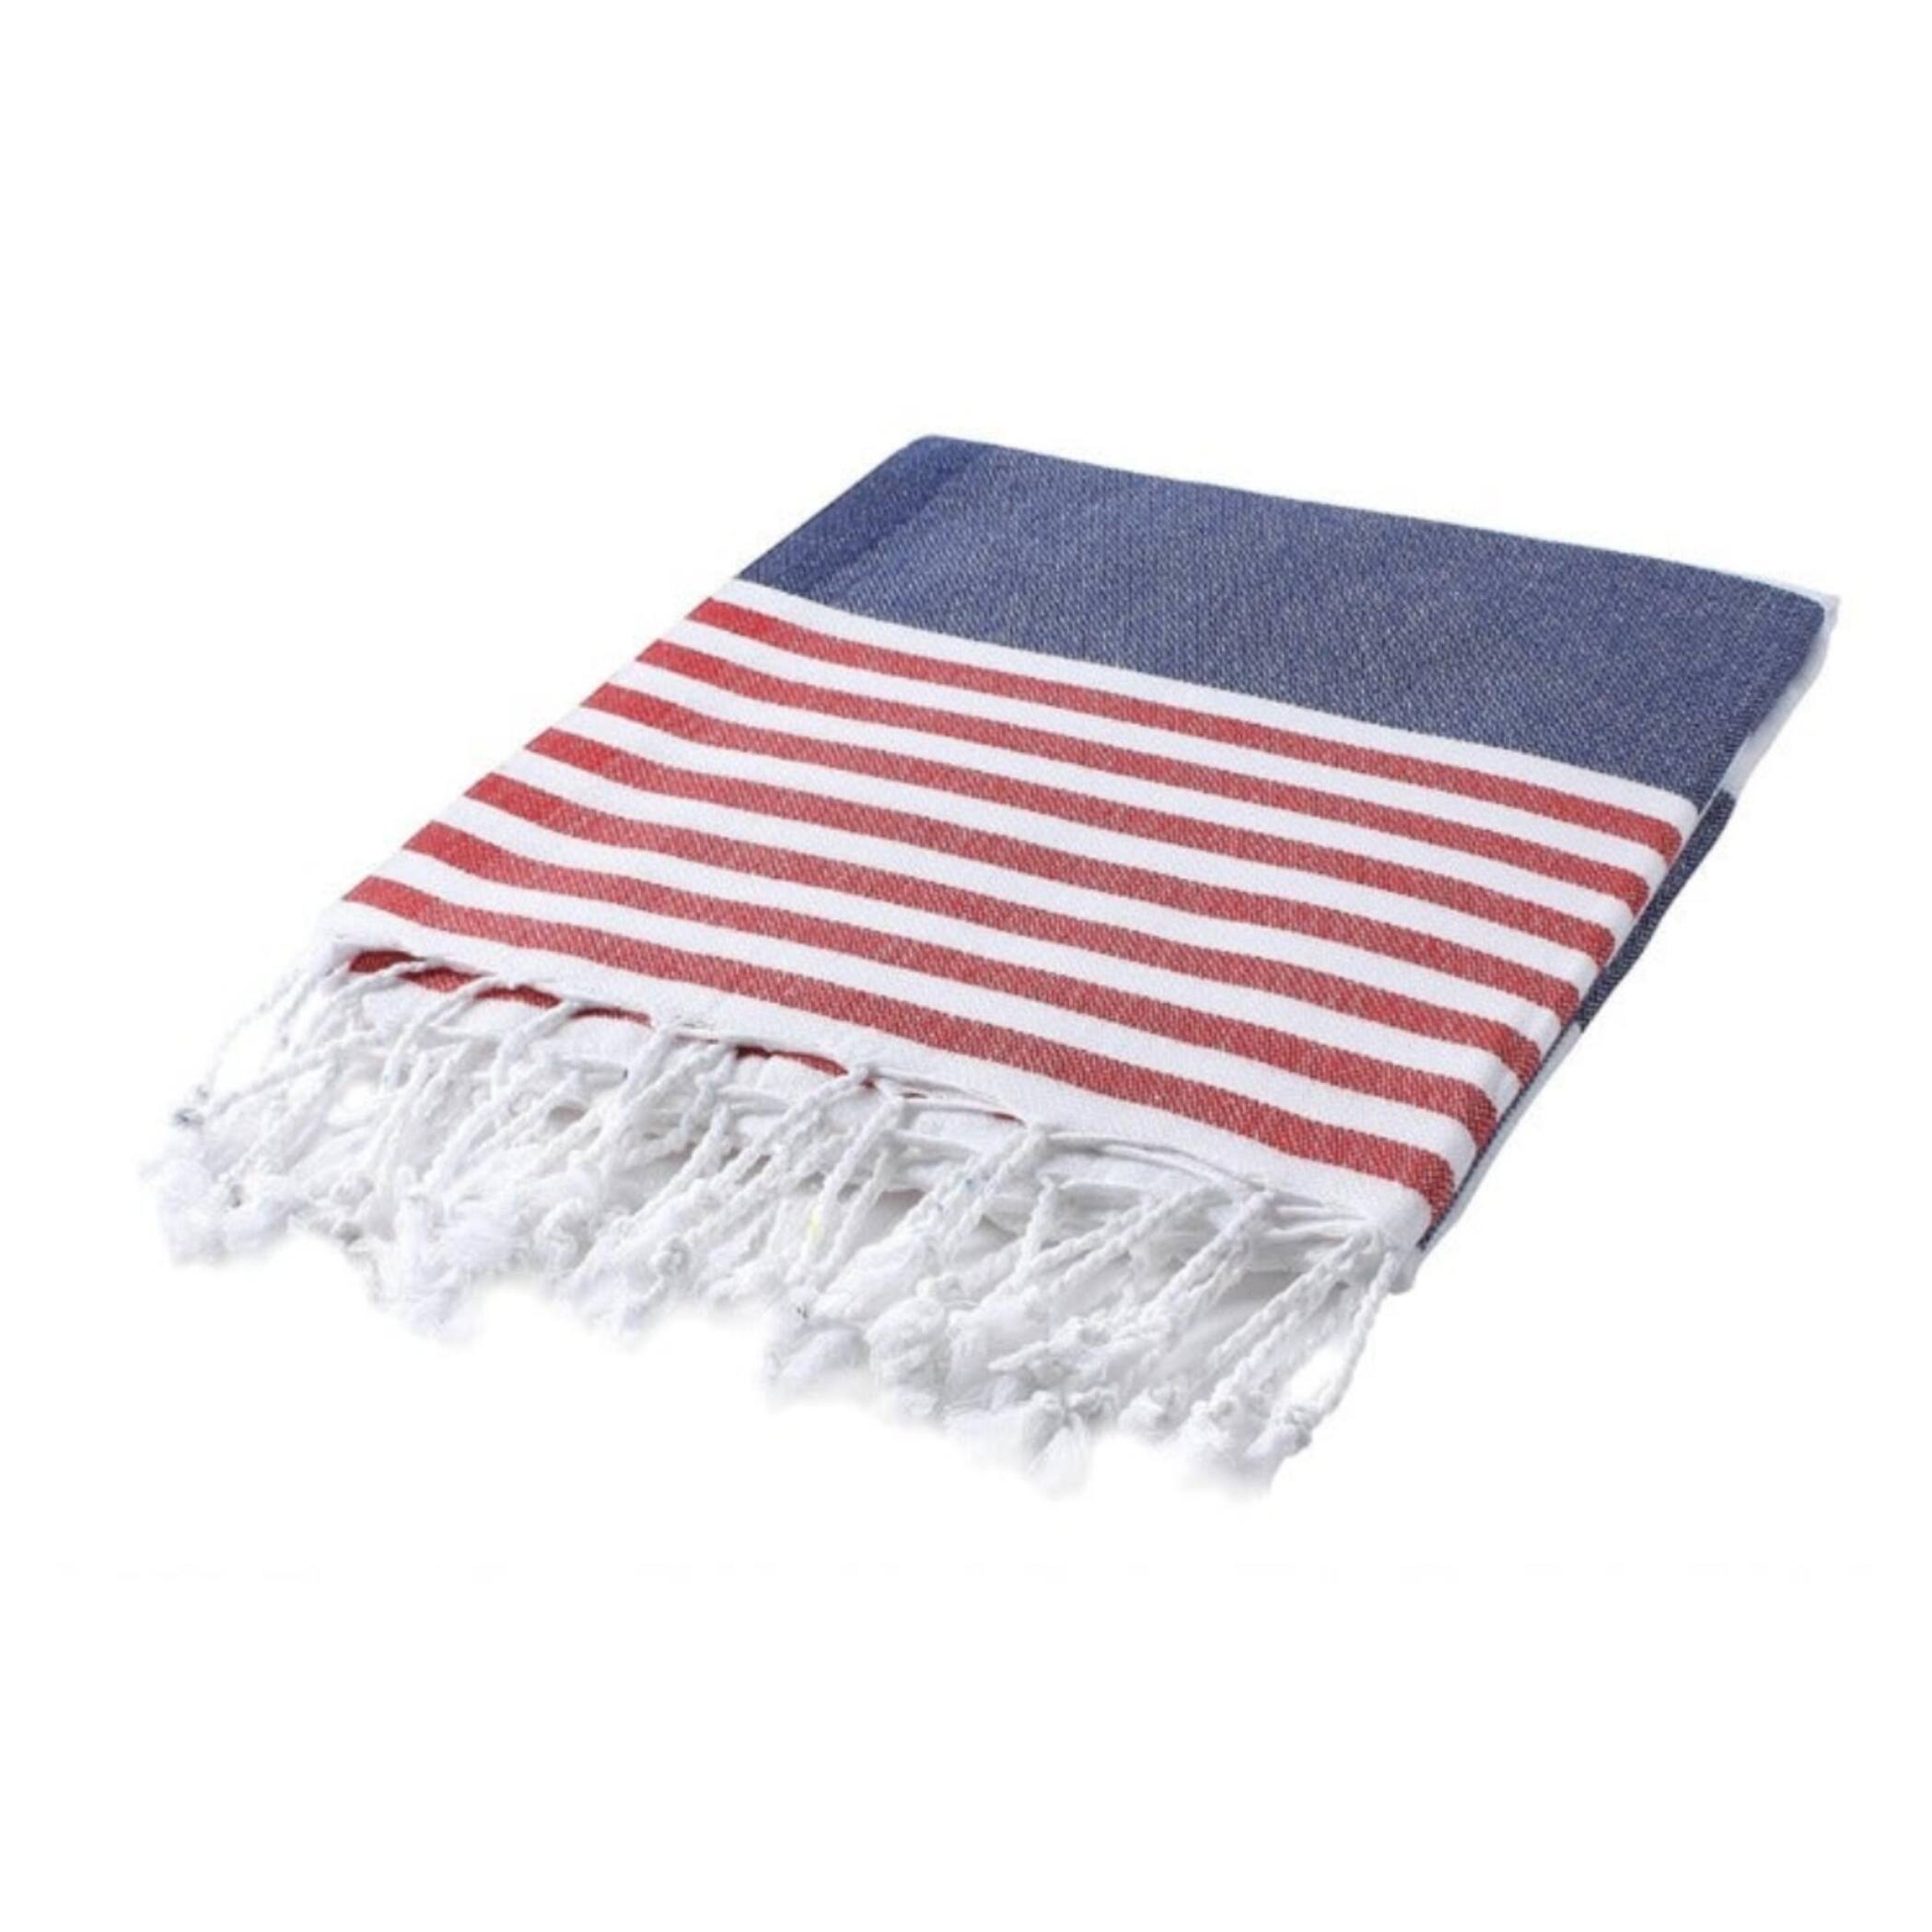 Red White Blue Beach Towel - Striped Authentic 100% Turkish Cotton Beach & Bath Towels - Citizens of the Beach Collection